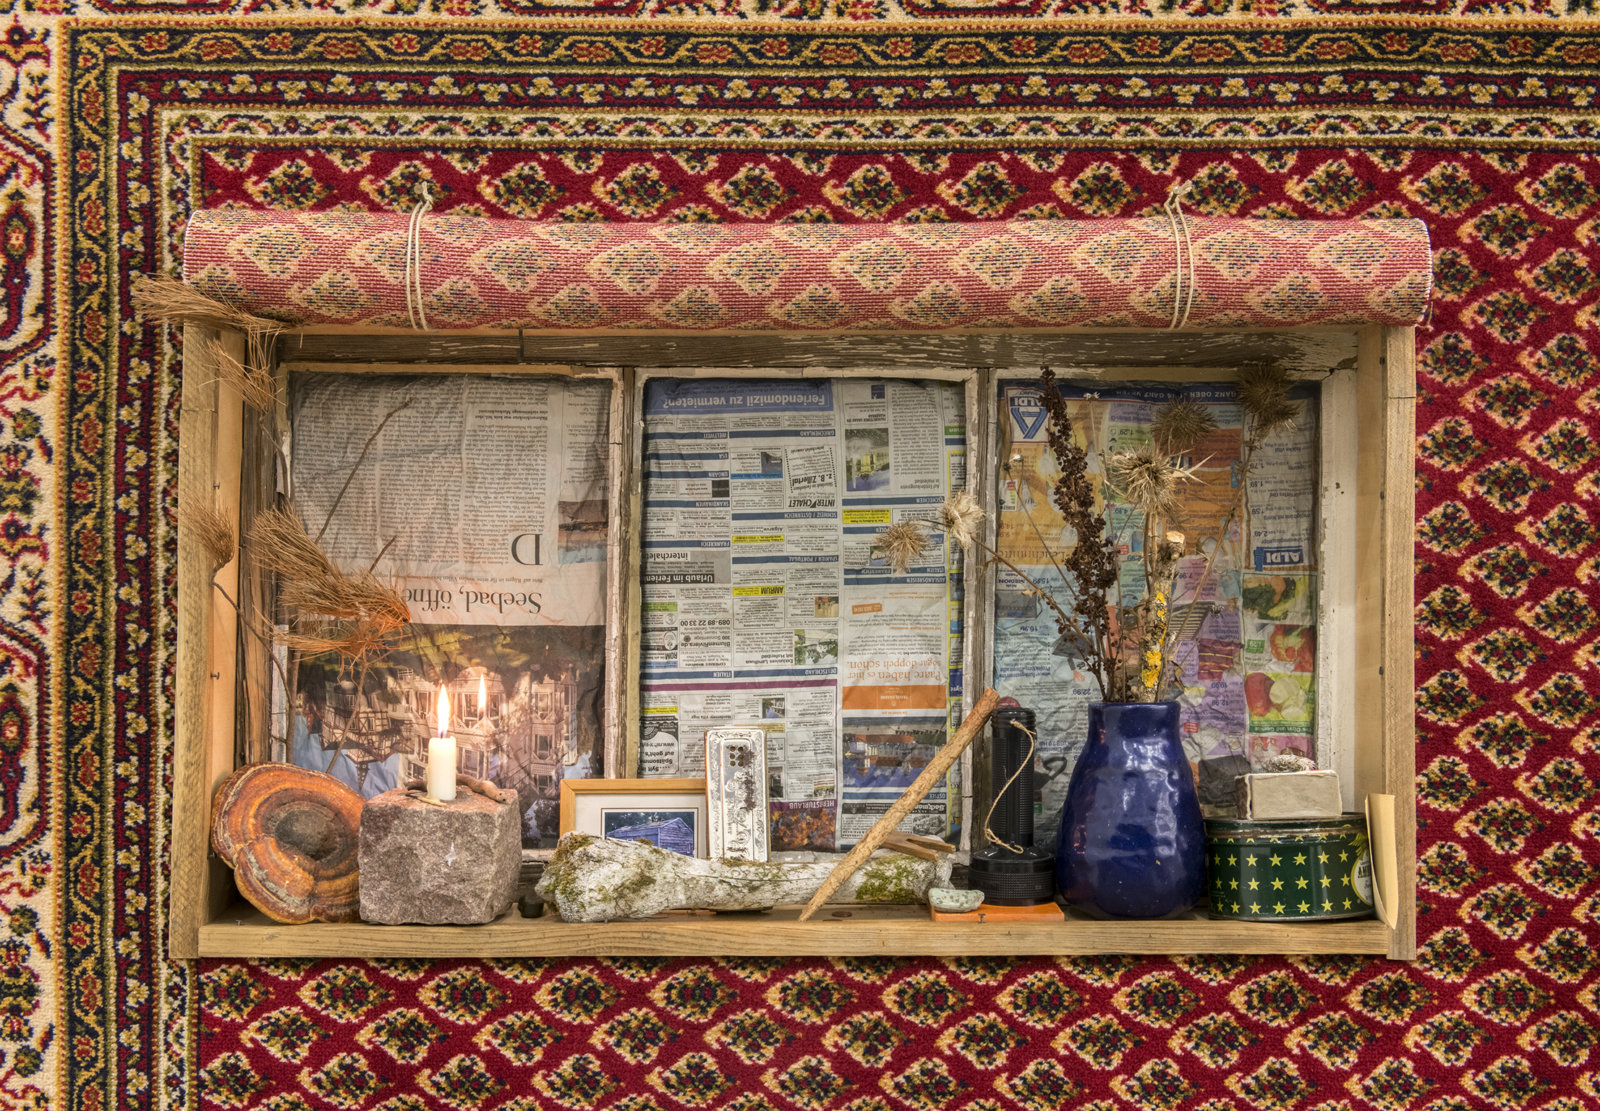 Ashes Withyman, Pensione from a place, near the buried canal (detail), 2011–2012, carpet, cow bone, candle, stone, fungus, harmonica, pine branch, string, clothes peg, flashlight, tin, matches, paper, window, newspaper, 80 x 106 x 10 in. (203 x 269 x 25 cm)